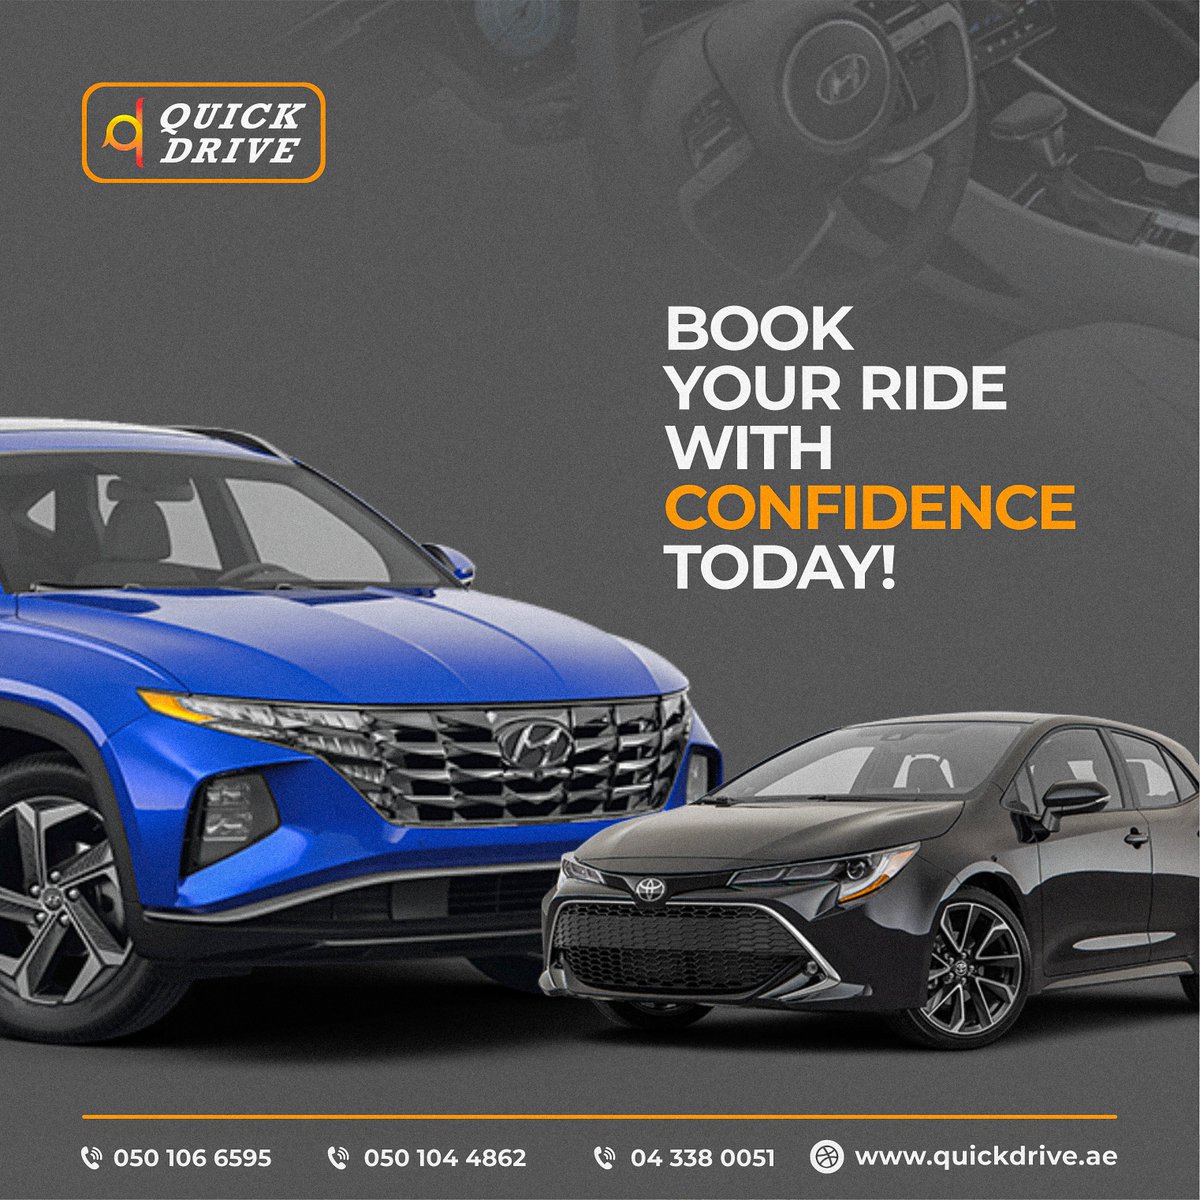 Discover the beauty of Dubai with Quick Drive Rent a Car! Whether you're looking for a compact car or a spacious SUV, we've got you covered. Book your ride today and enjoy a hassle-free journey.

Call or WhatsApp
+971505259245

Visit: quickdrive.ae

#RentalCars